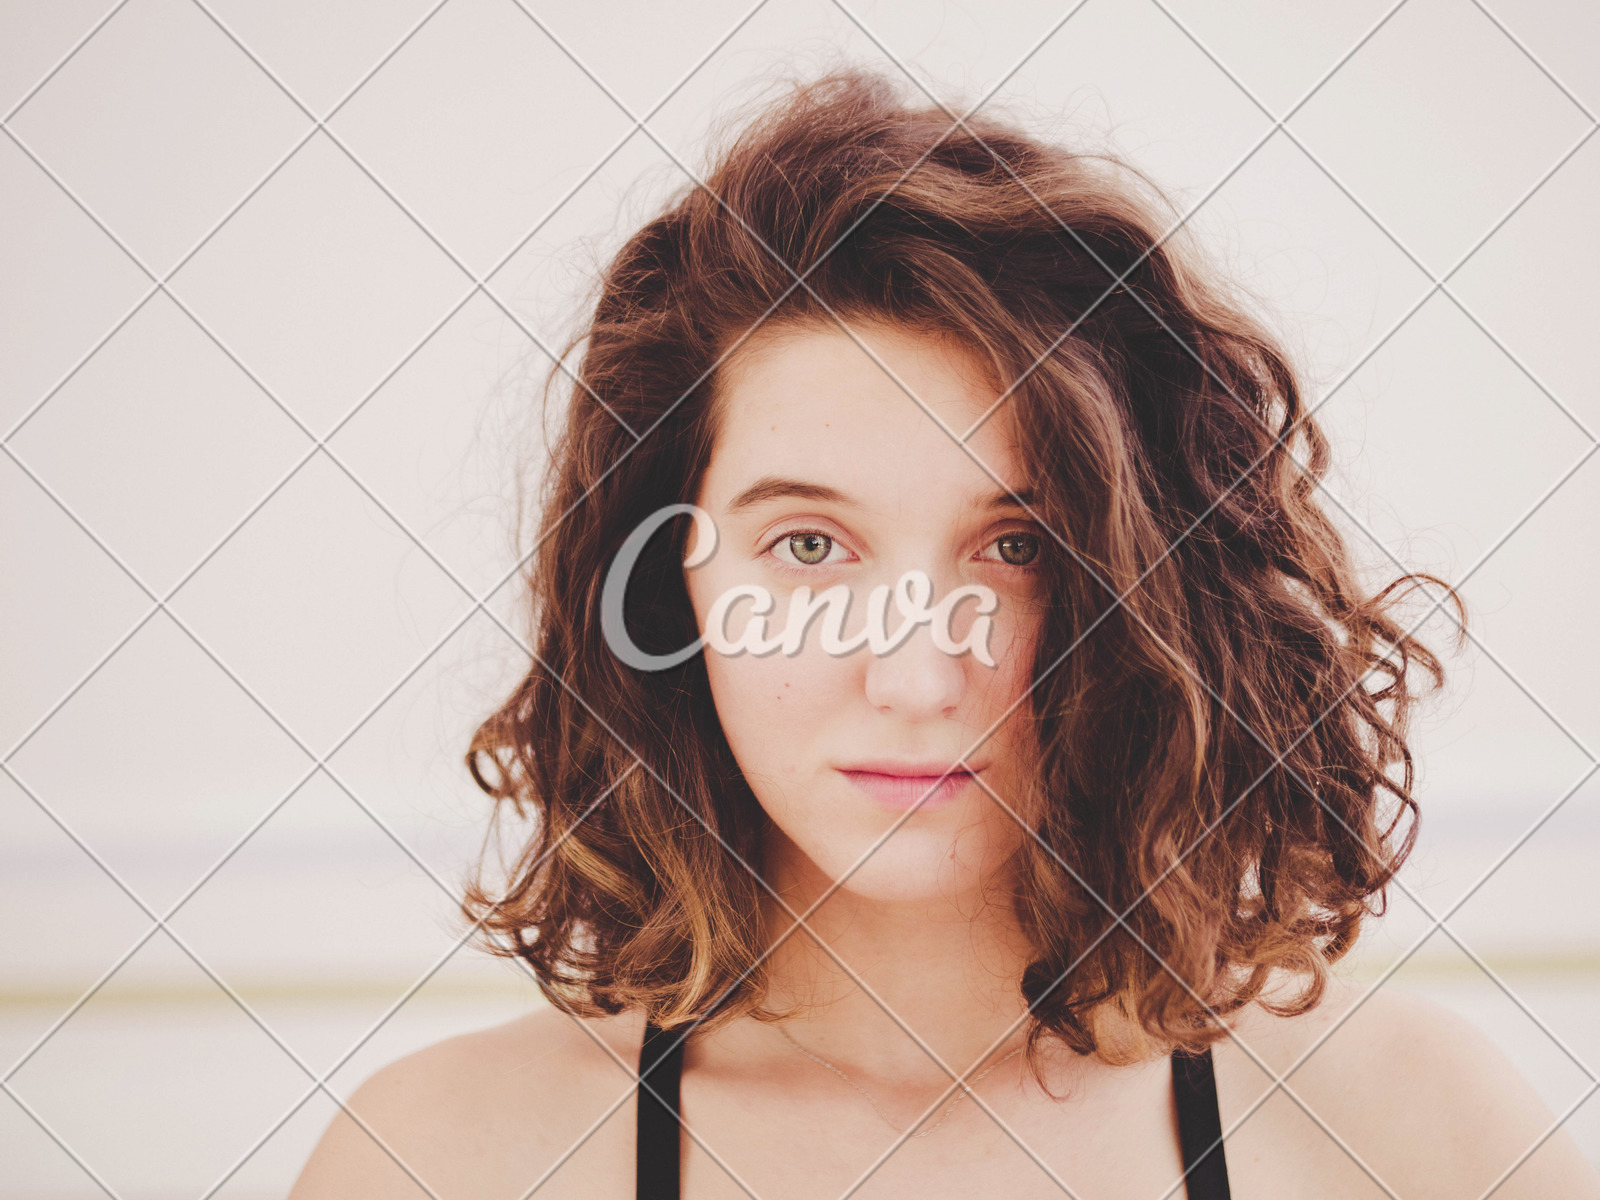 Portrait Of Young Pretty Yoga Girl With Short Curly Hair In